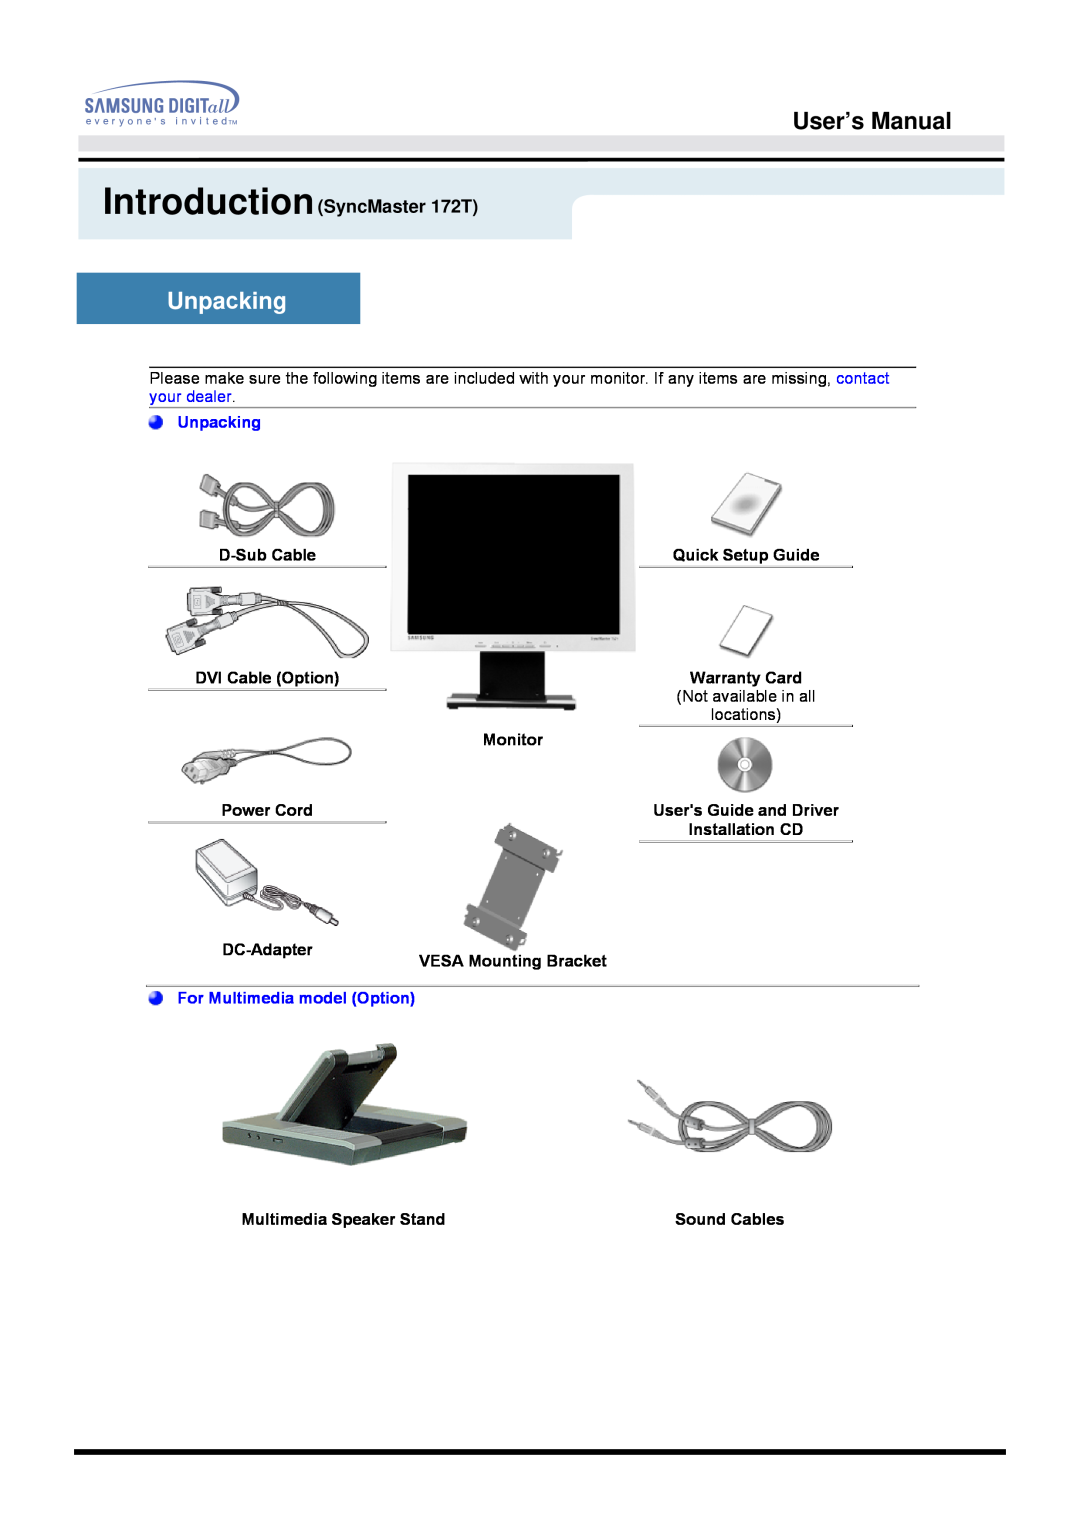 Samsung 172S manual User’s Manual, Unpacking, IntroductionSyncMaster 172T, D-Sub Cable, Quick Setup Guide, DVI Cable Option 